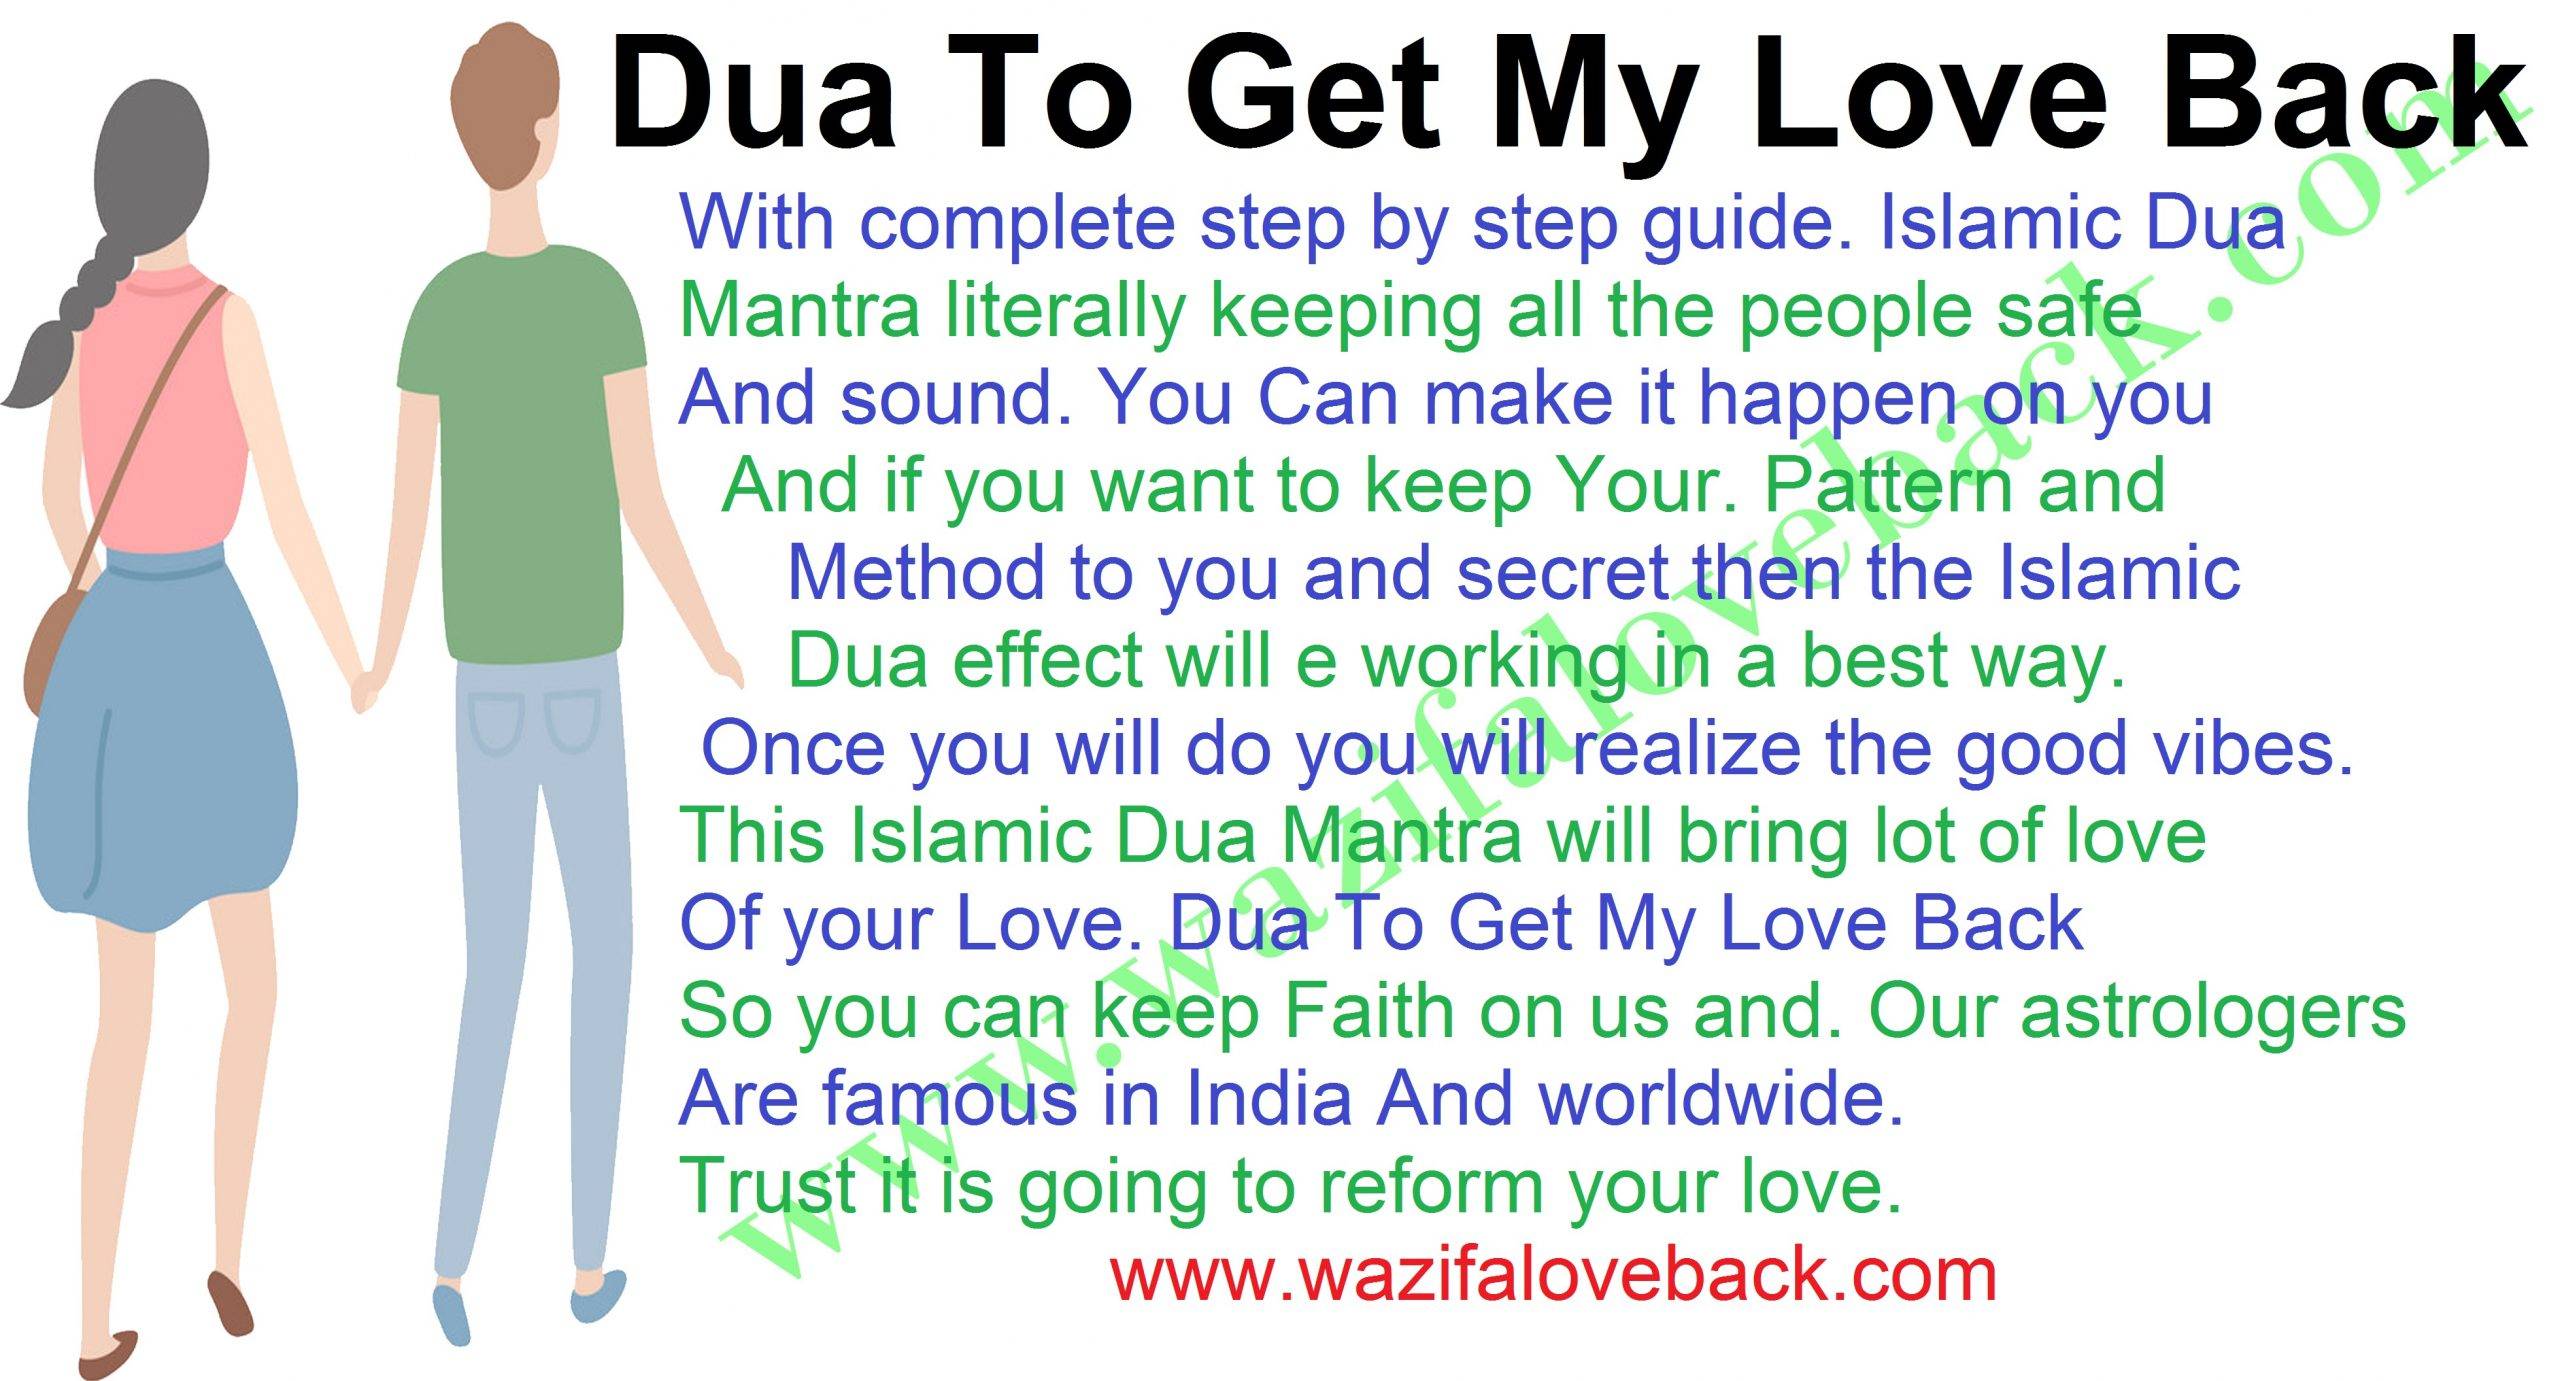 Dua To Get My Love Back